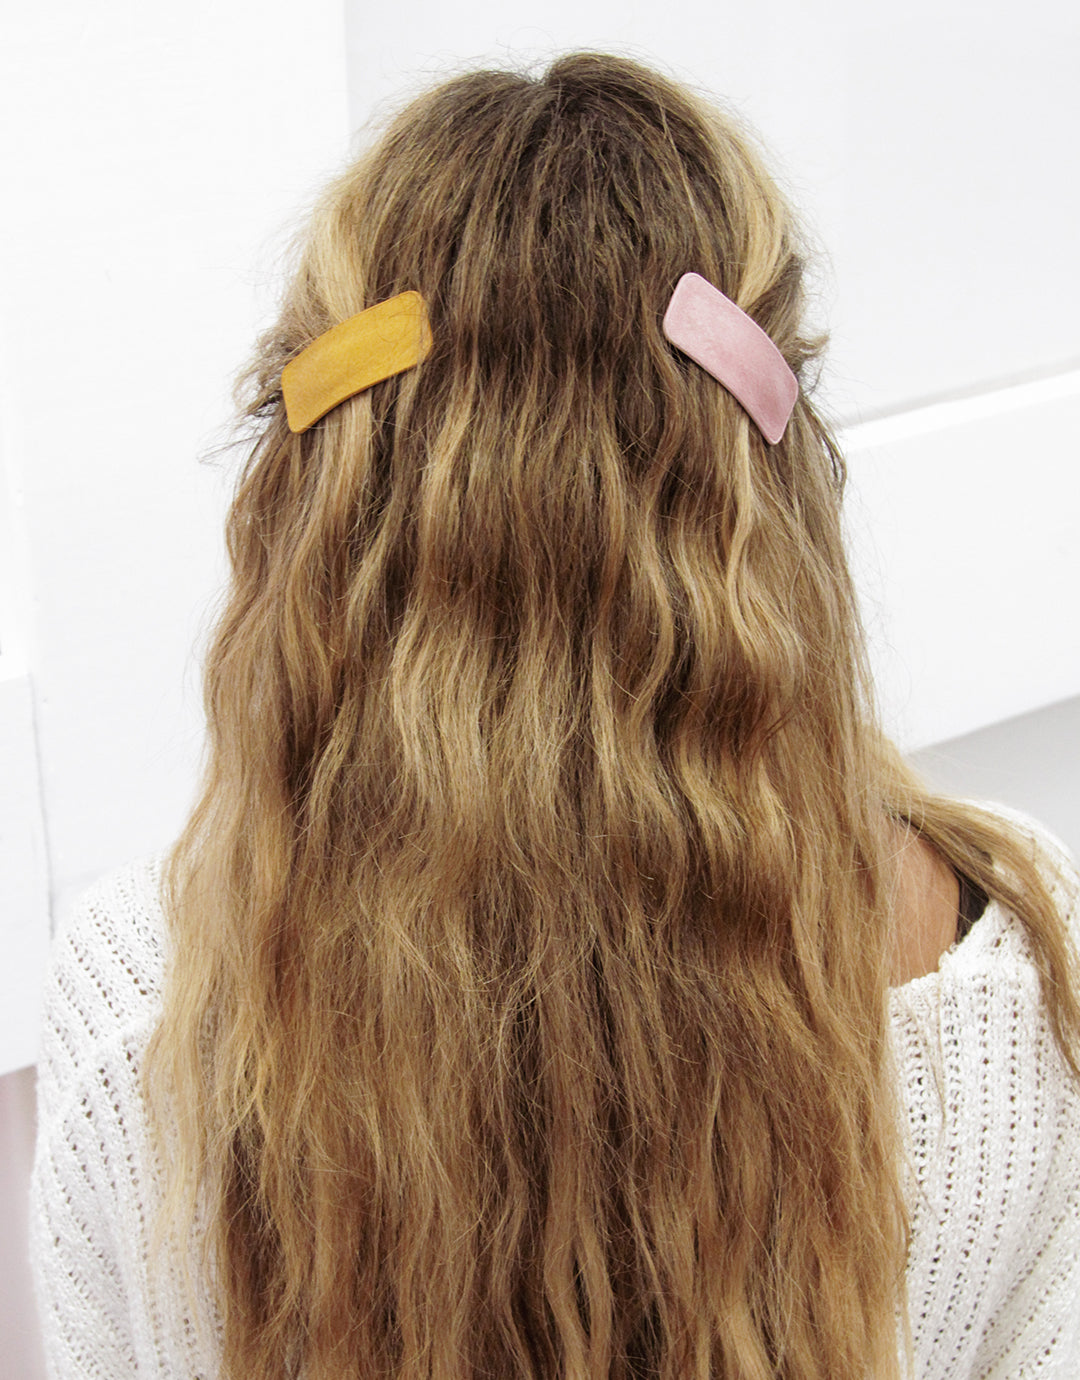 back view of person with long wavy blonde hair clipped on each side with barrettes.